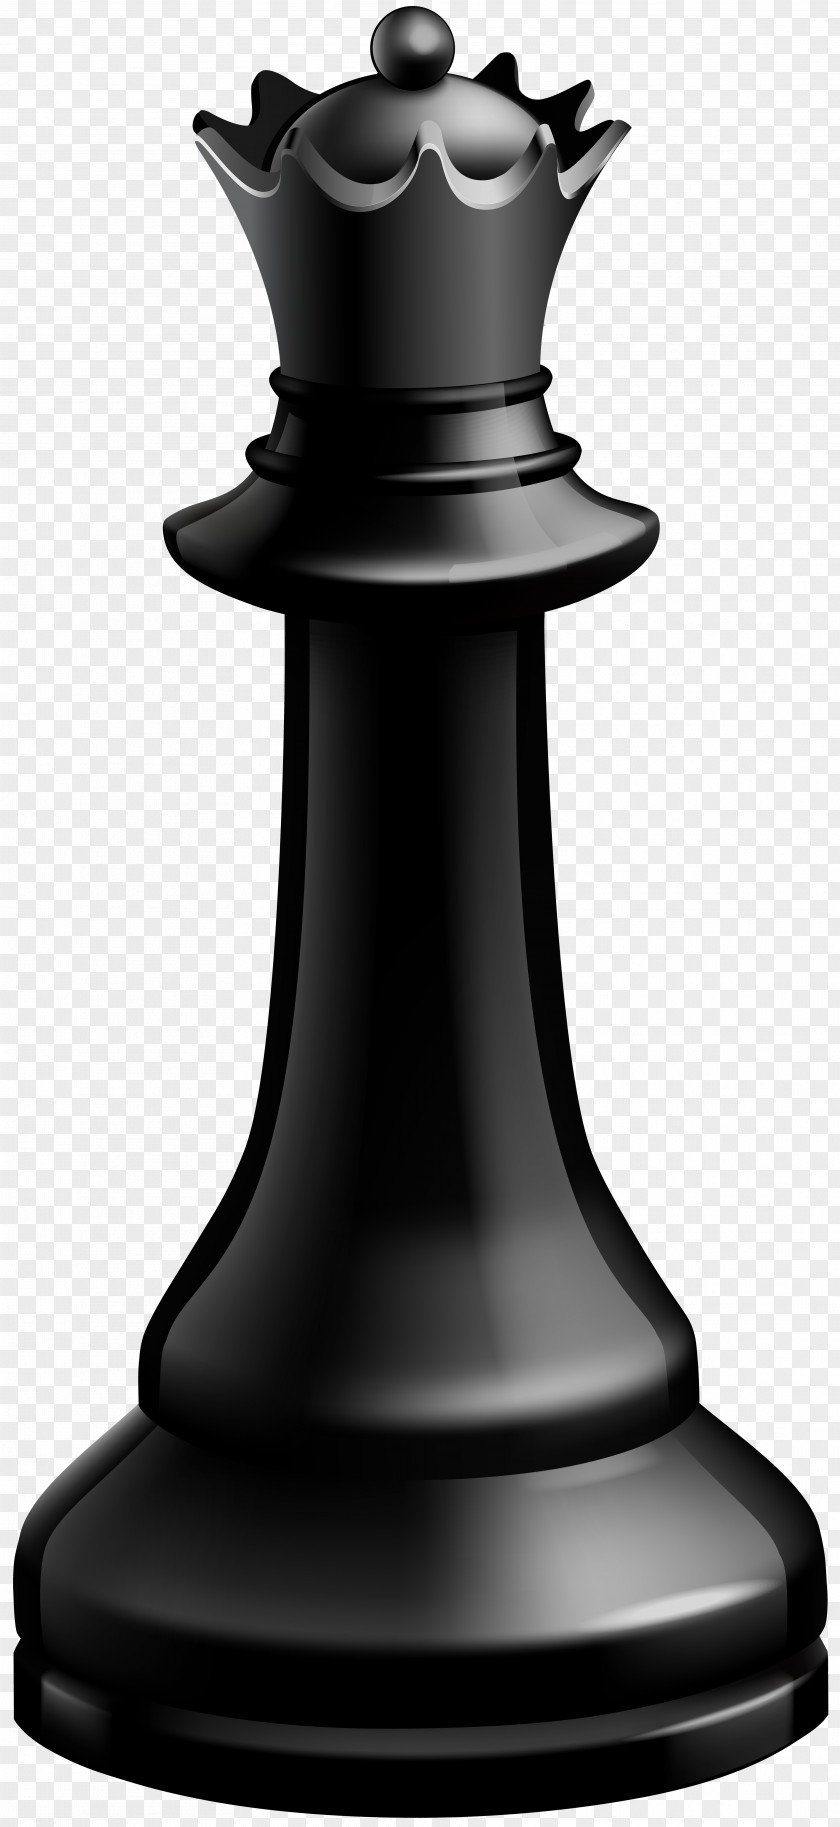 Chess Piece Queen Image PNG